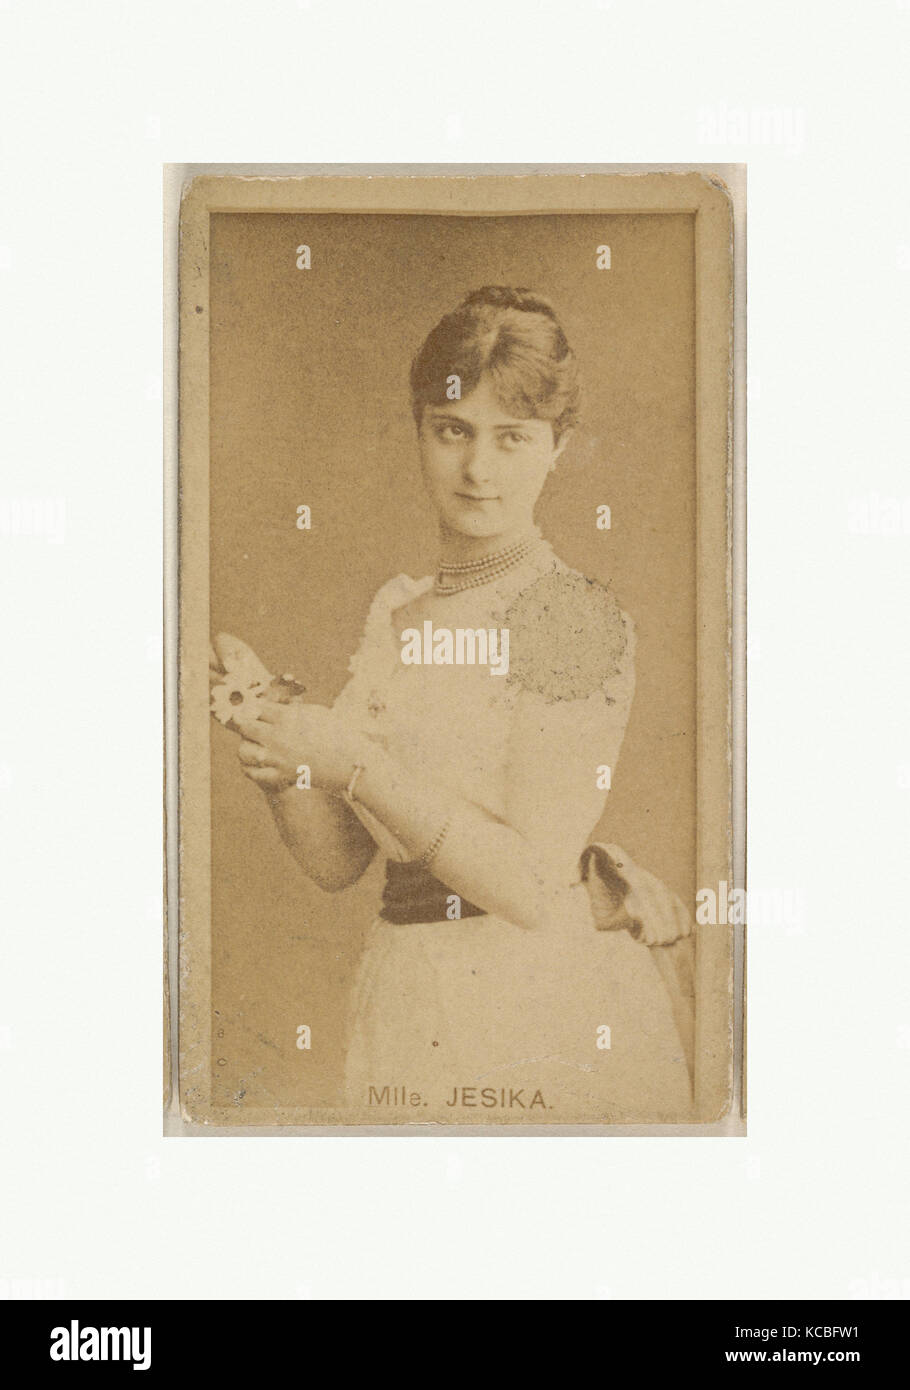 Mlle. Jesika, from the Actors and Actresses series (N45, Type 8) for Virginia Brights Cigarettes, ca. 1888 Stock Photo